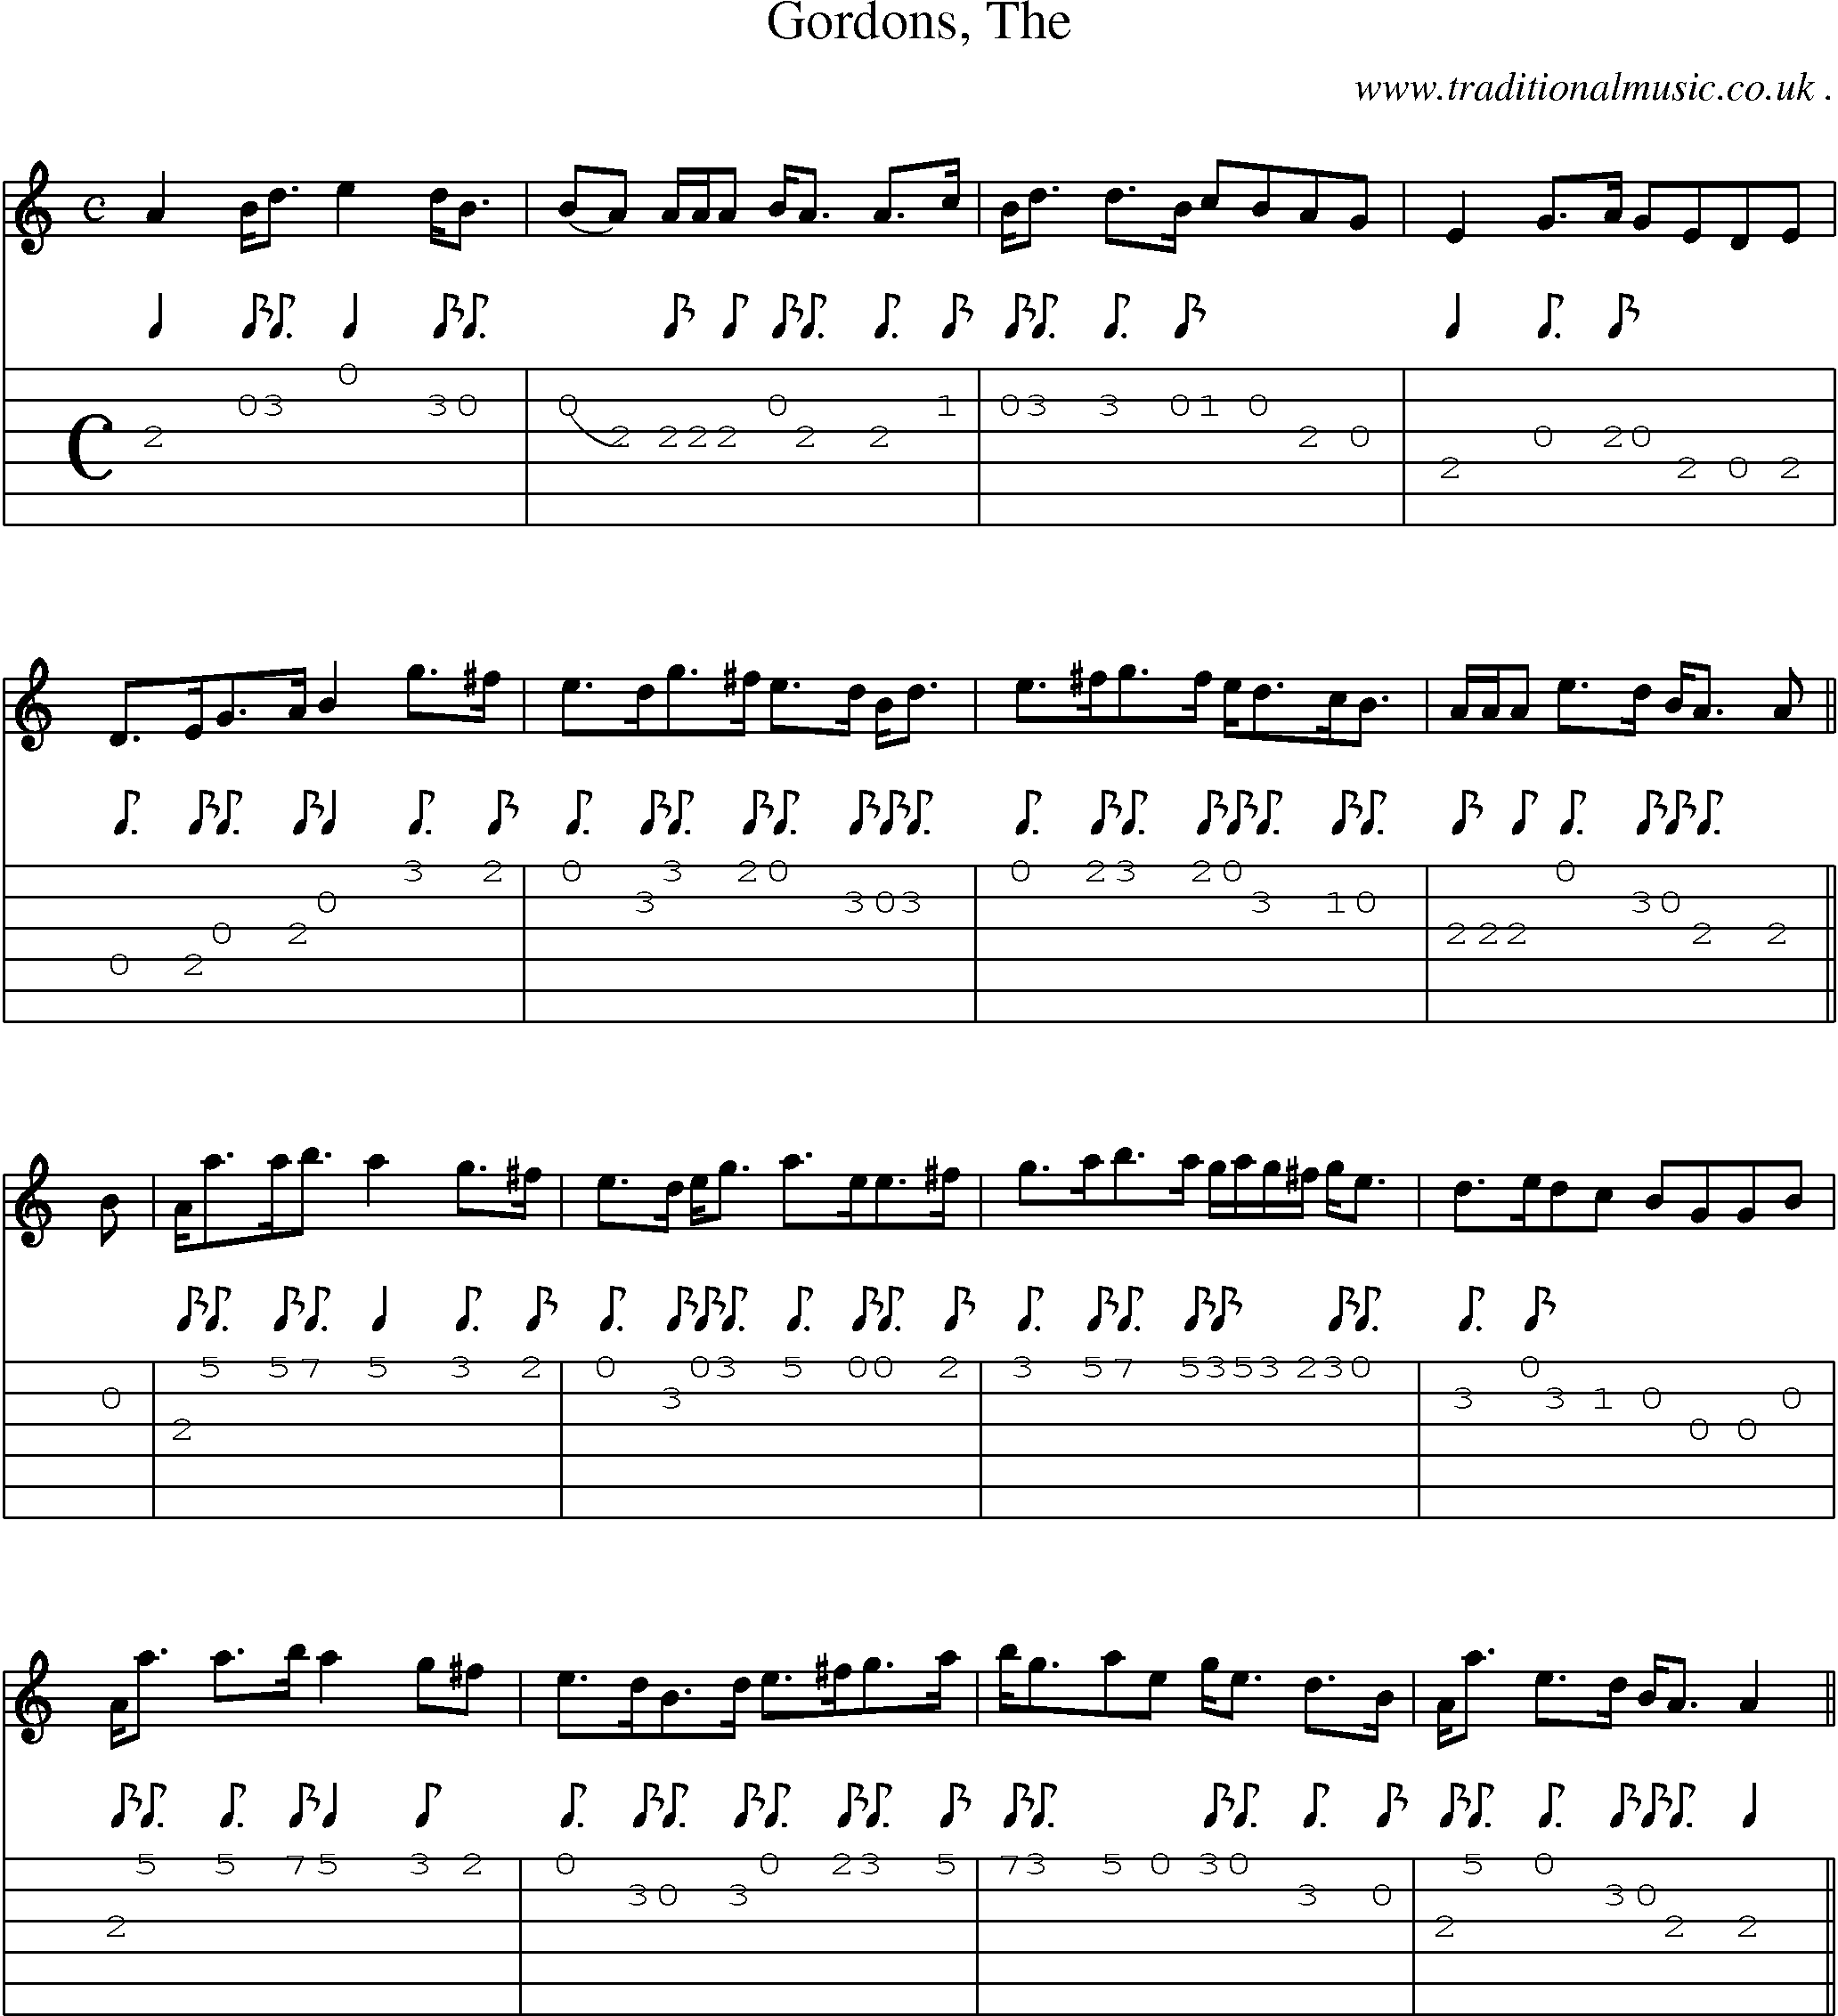 Sheet-music  score, Chords and Guitar Tabs for Gordons The